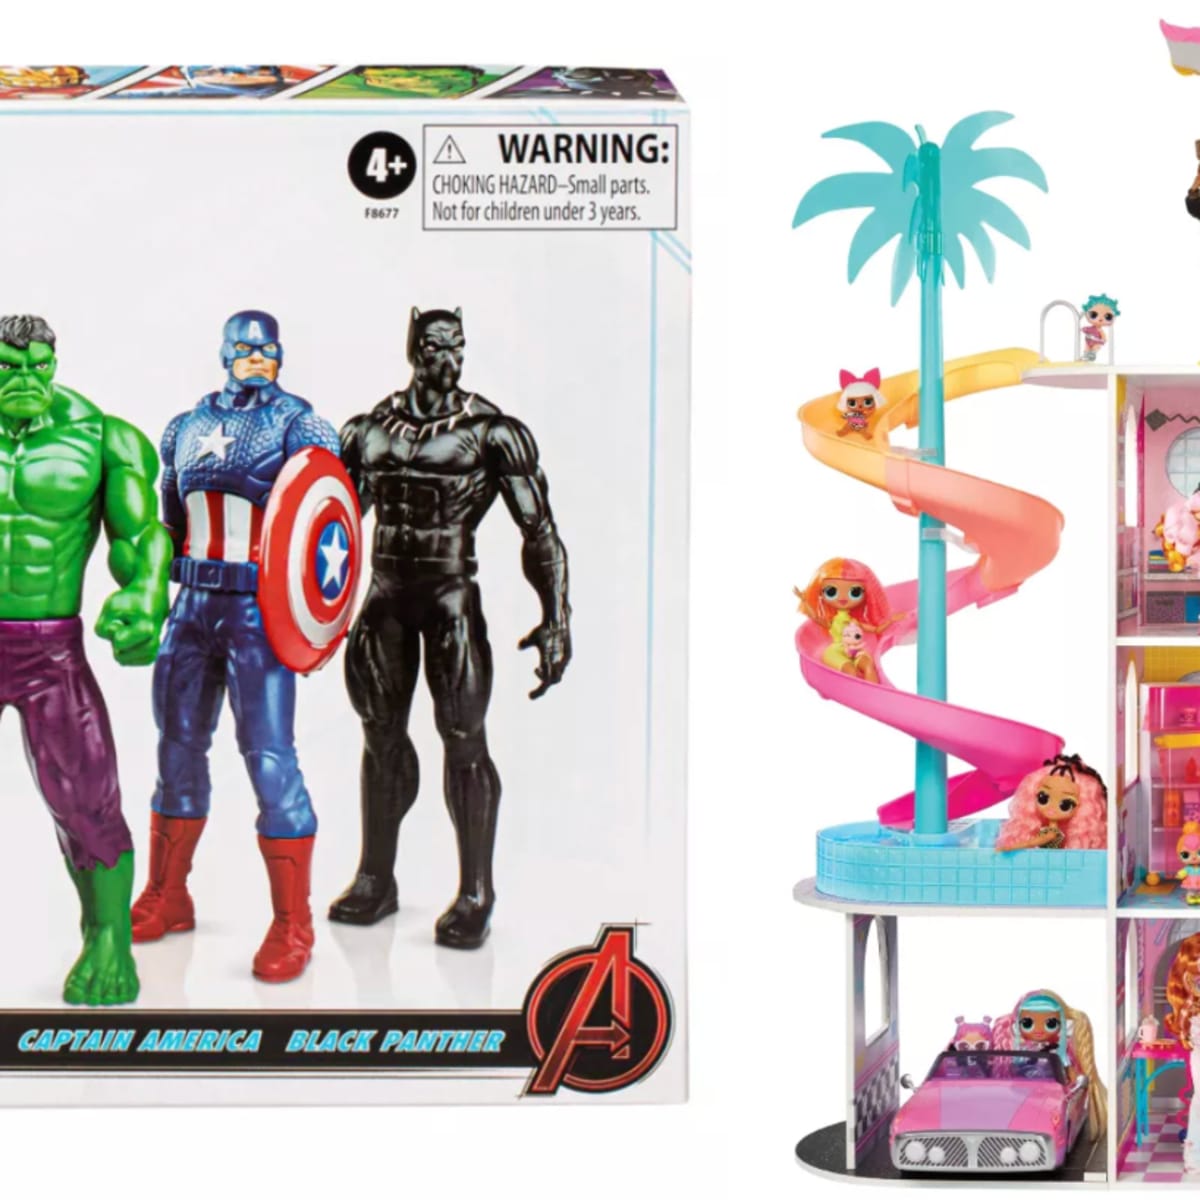 Bullseye's Top Toys List is Back and Better than Ever, Plus Big